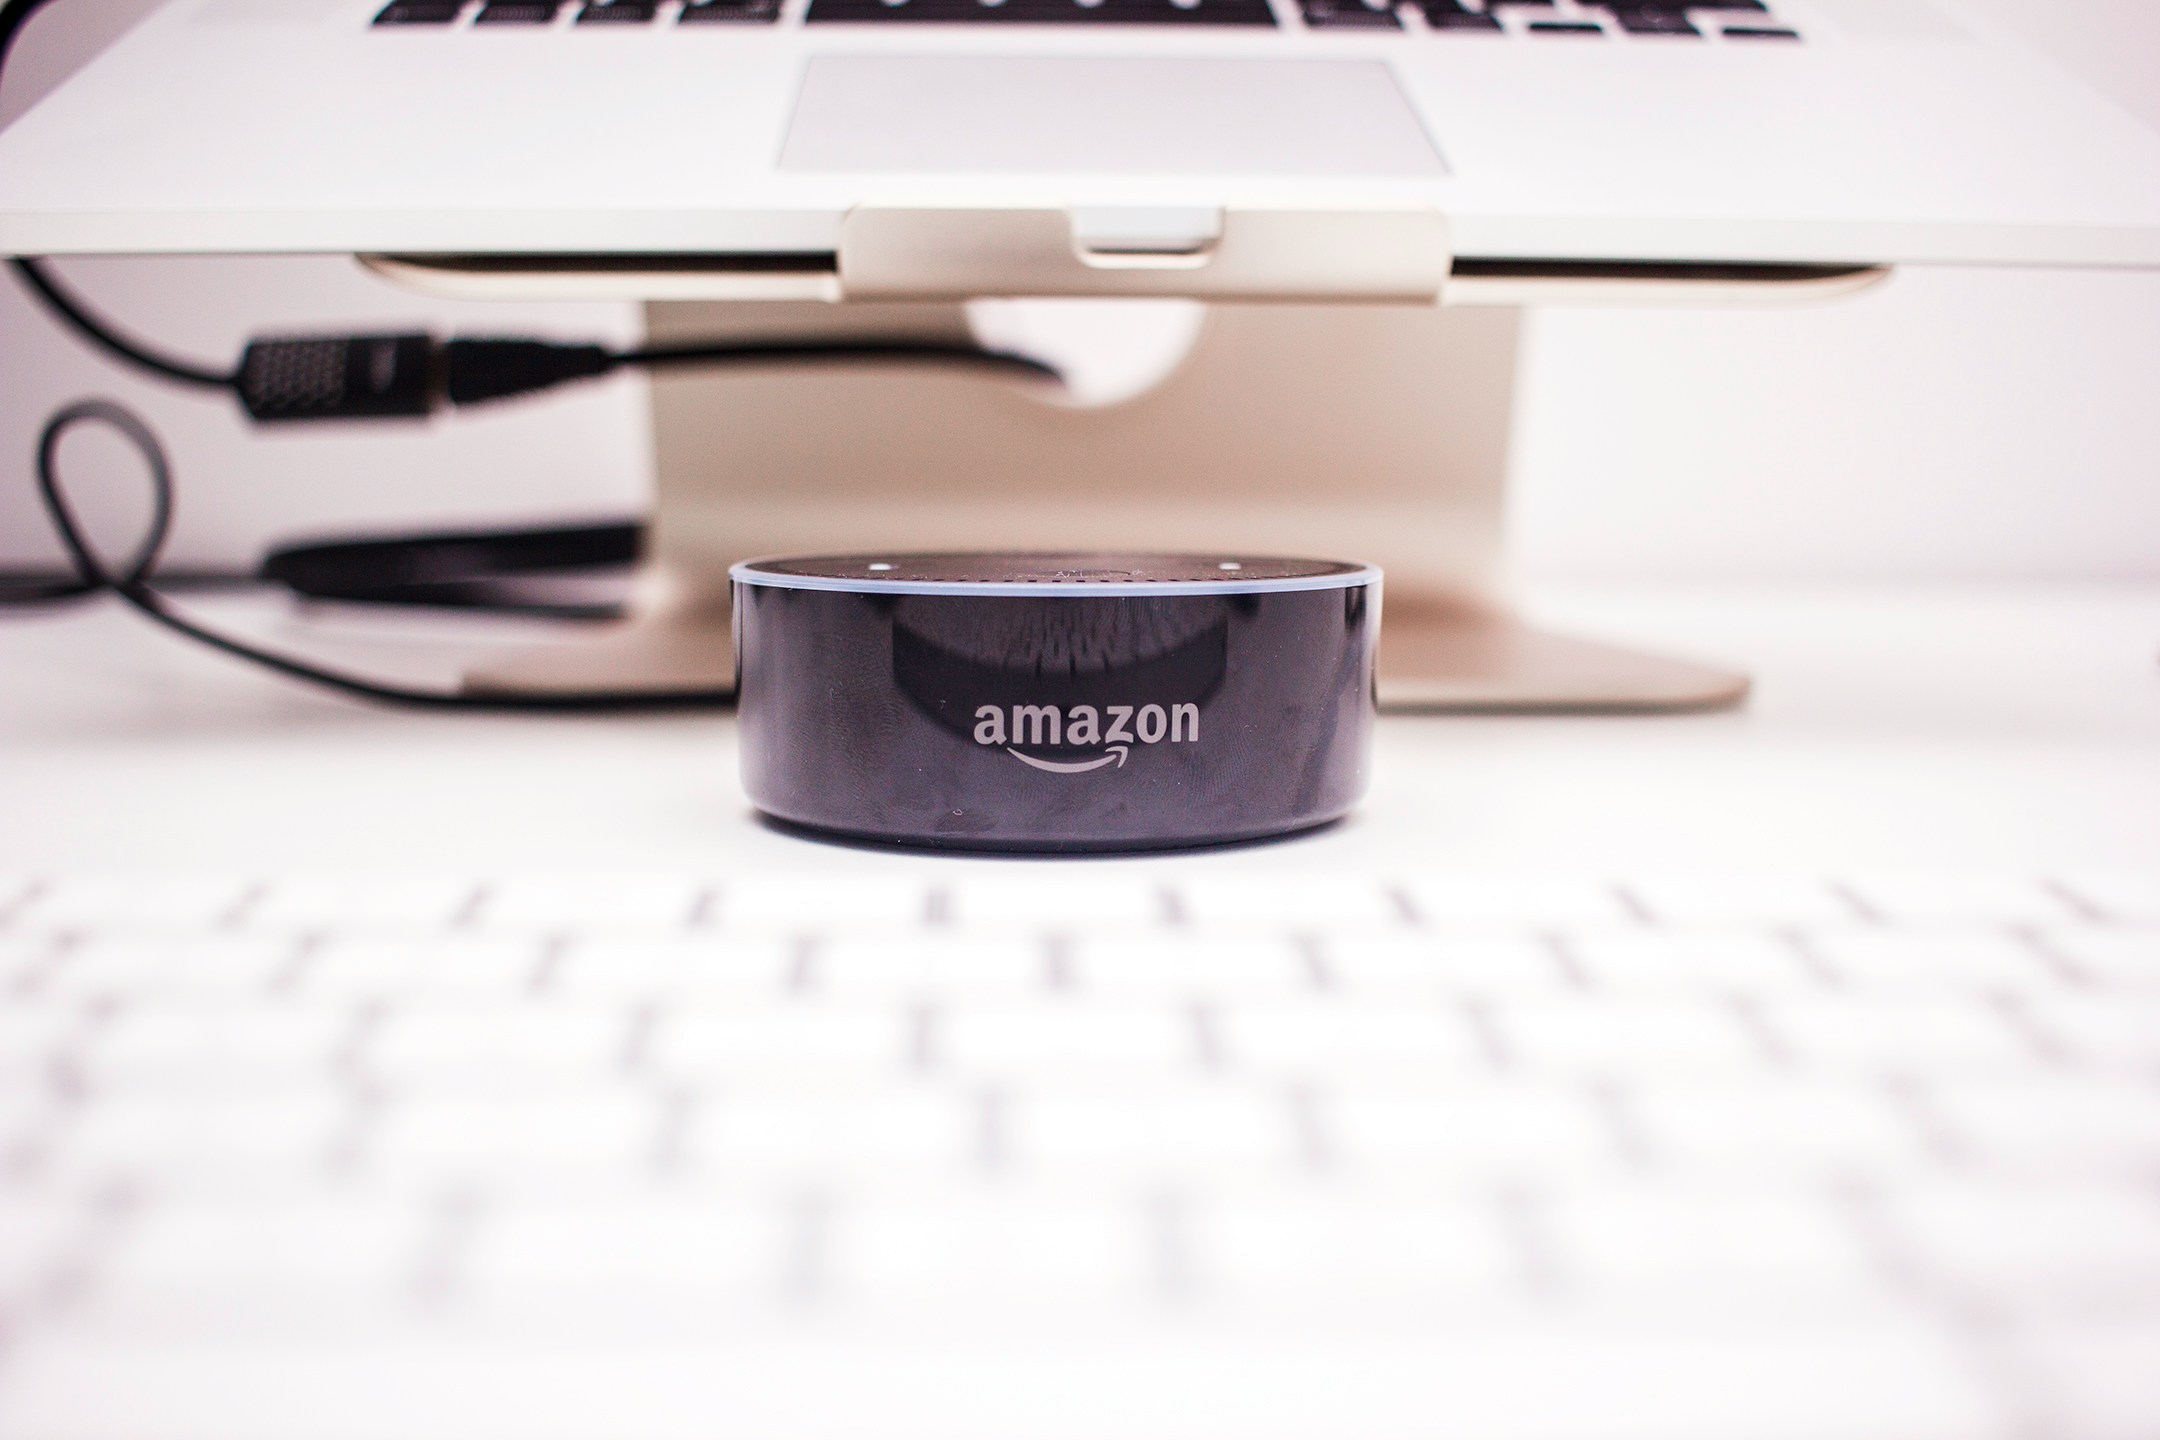 An Amazon Echo Dot on a desk next to an Apple laptop and keyboard, showing how a handful of technology companies have increasingly shaped daily life